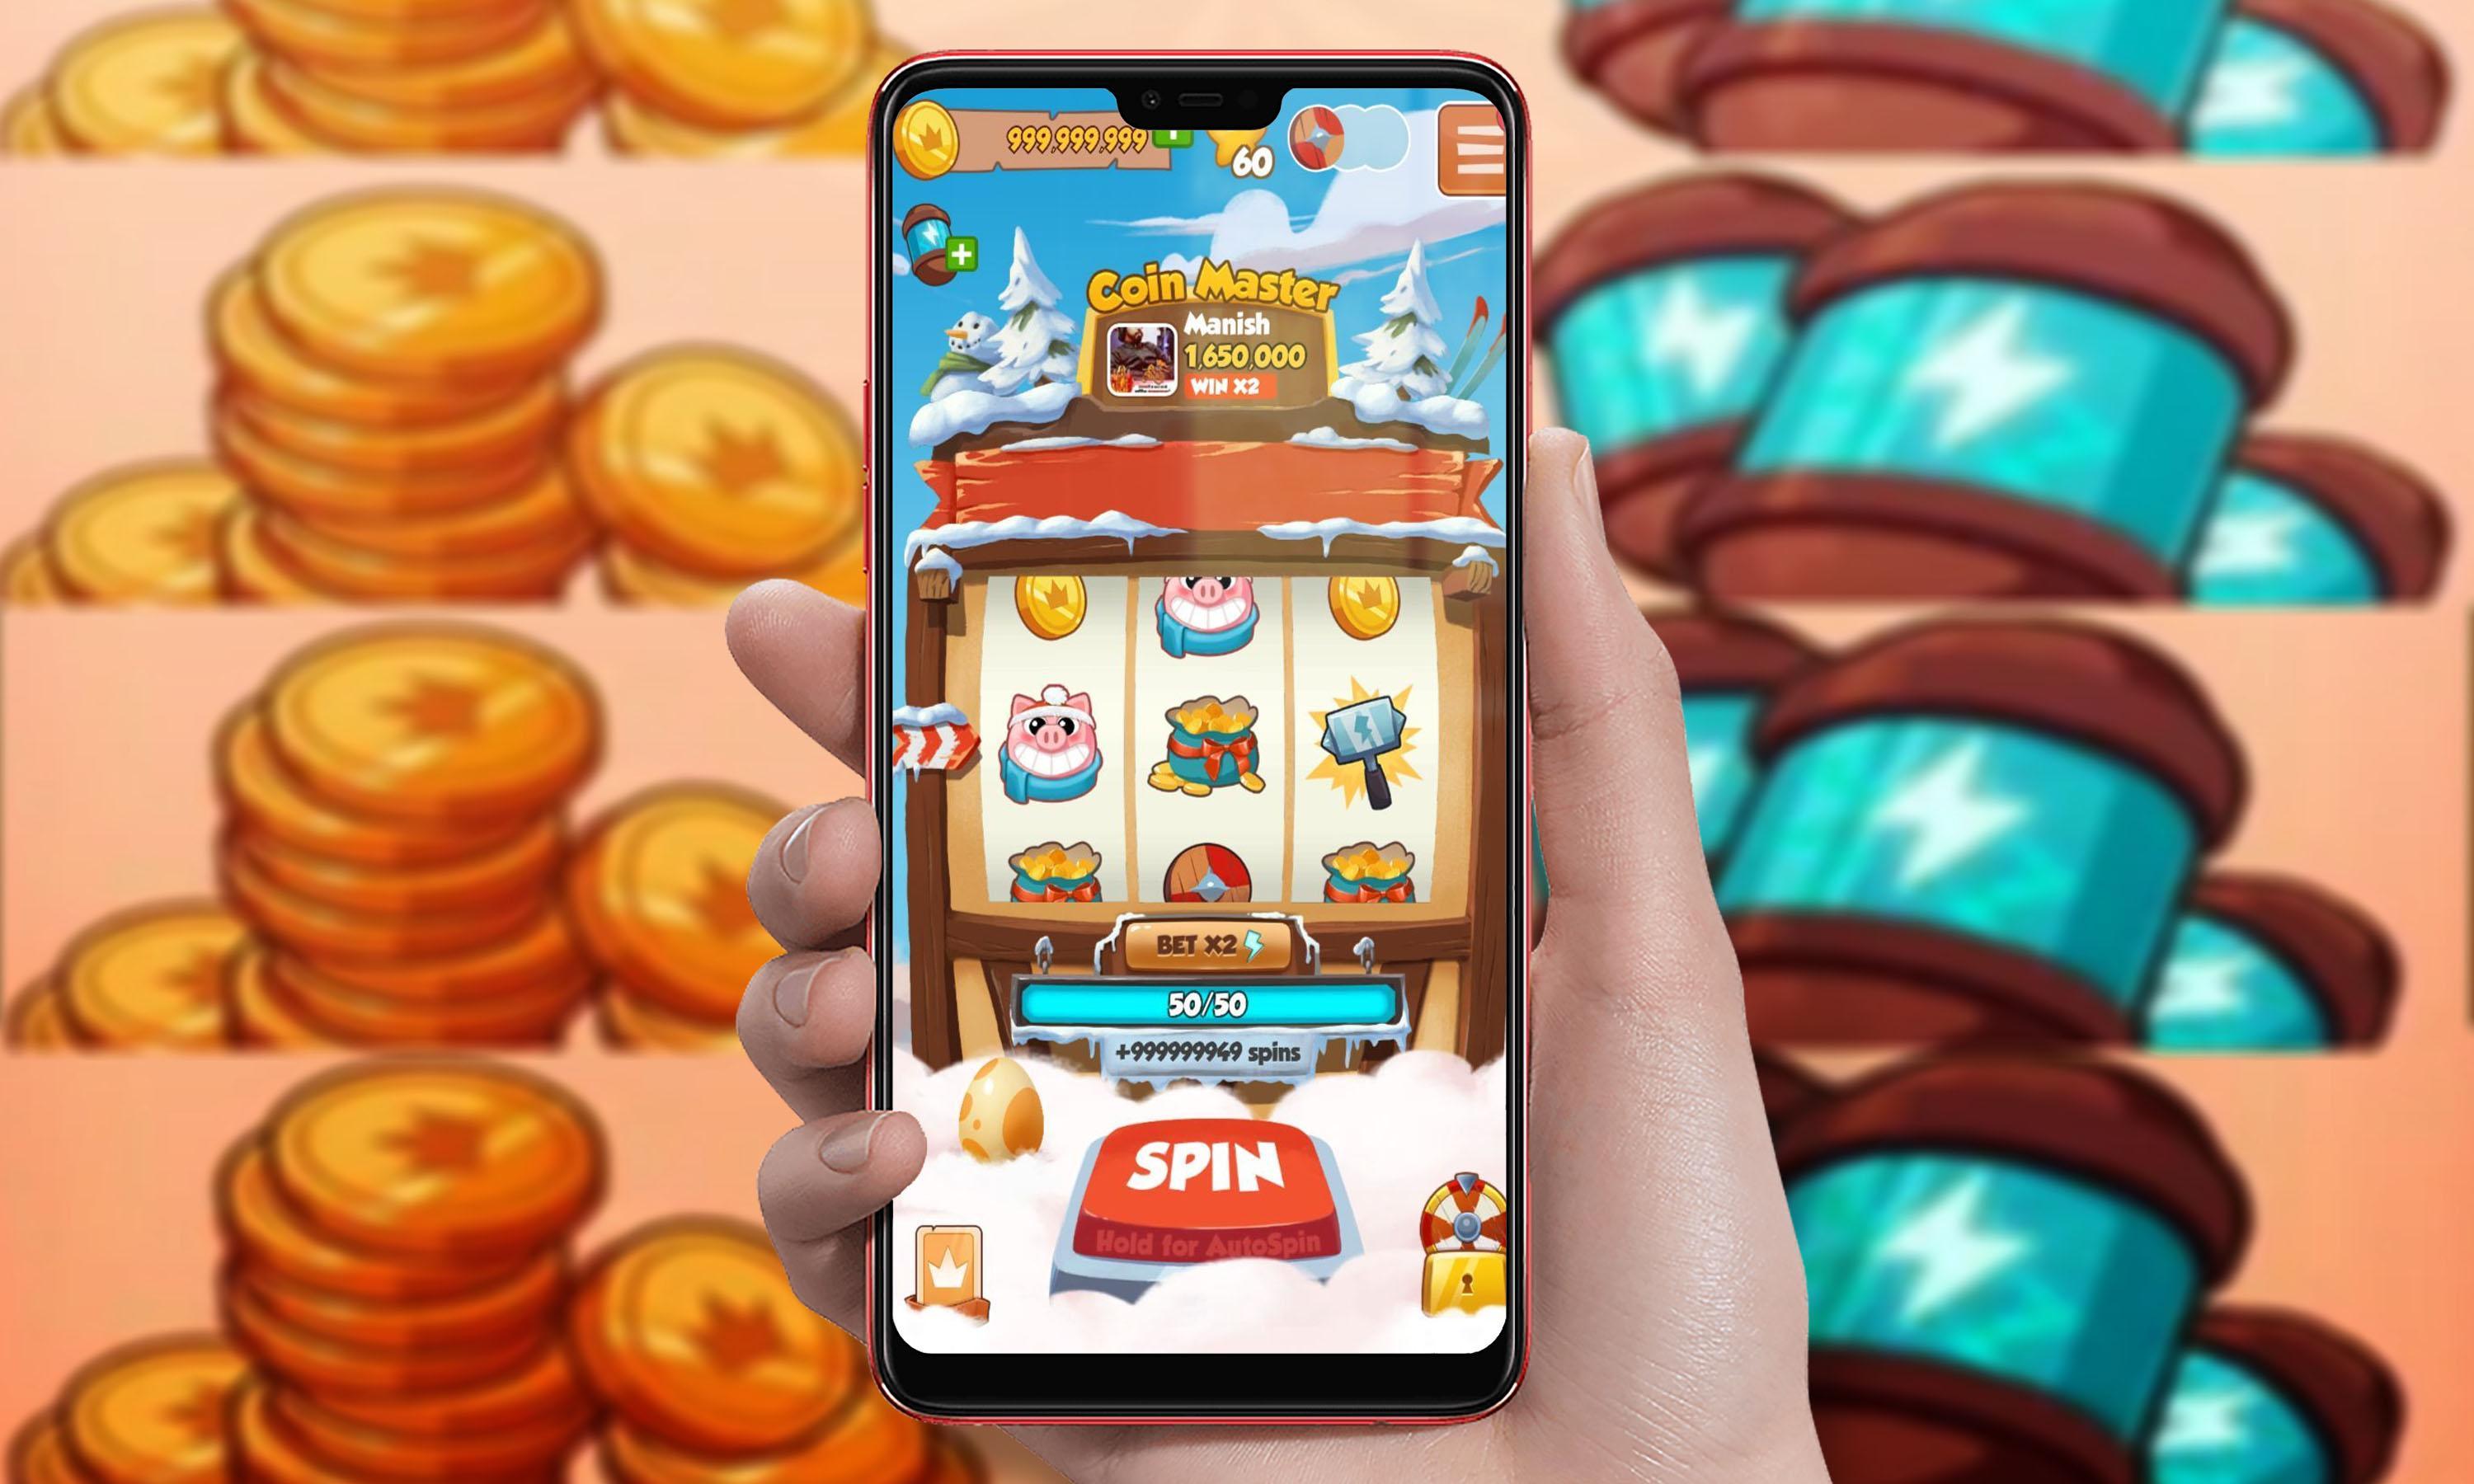 Learn Some Strategies to Grow a Village in Coin Master